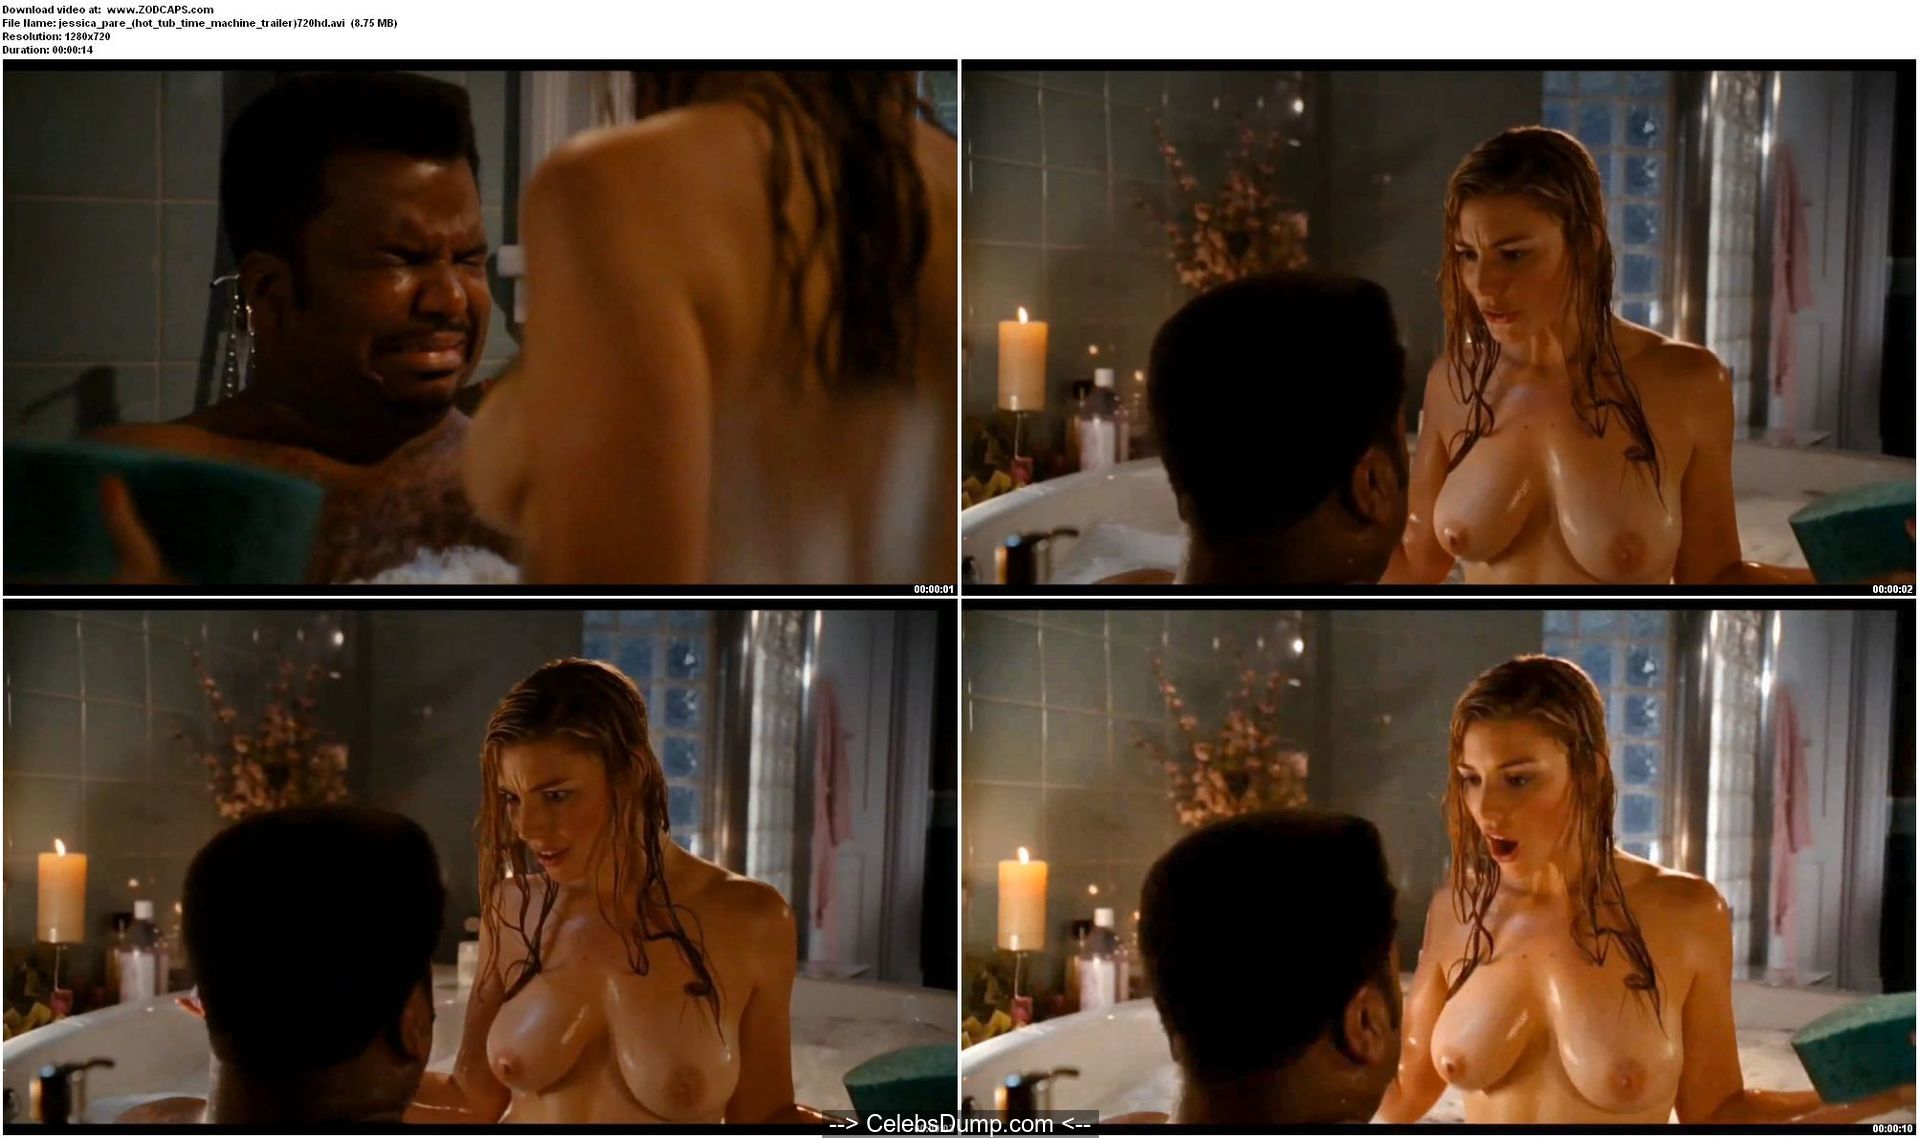 Jessica Pare shows her big nude boobs at Hot Tub Time Machine (2010) .